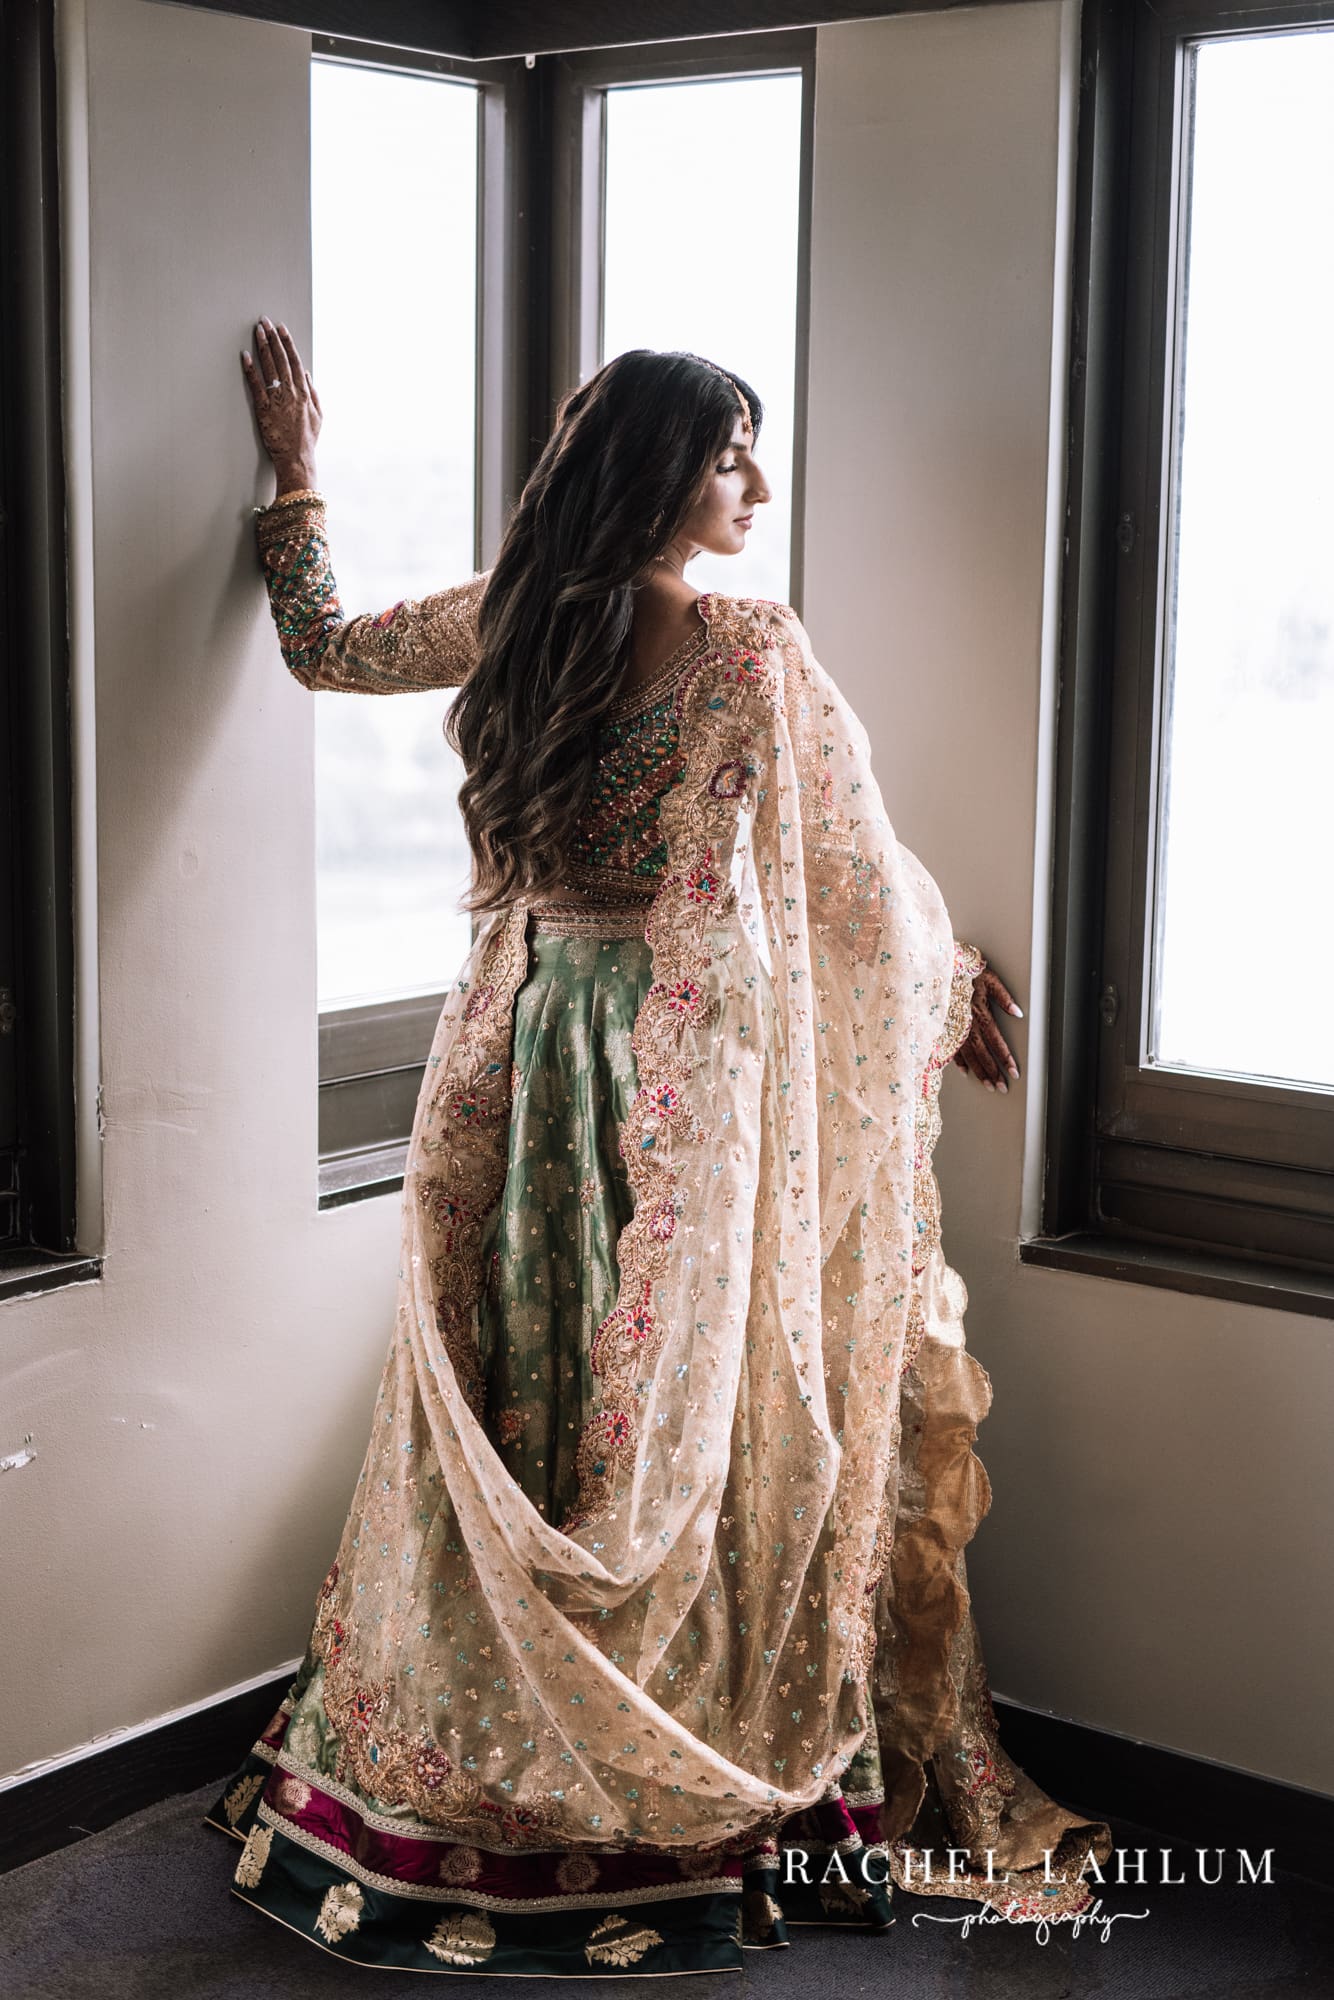 Bride shows off her dress before Walima celebration in St. Paul, MN